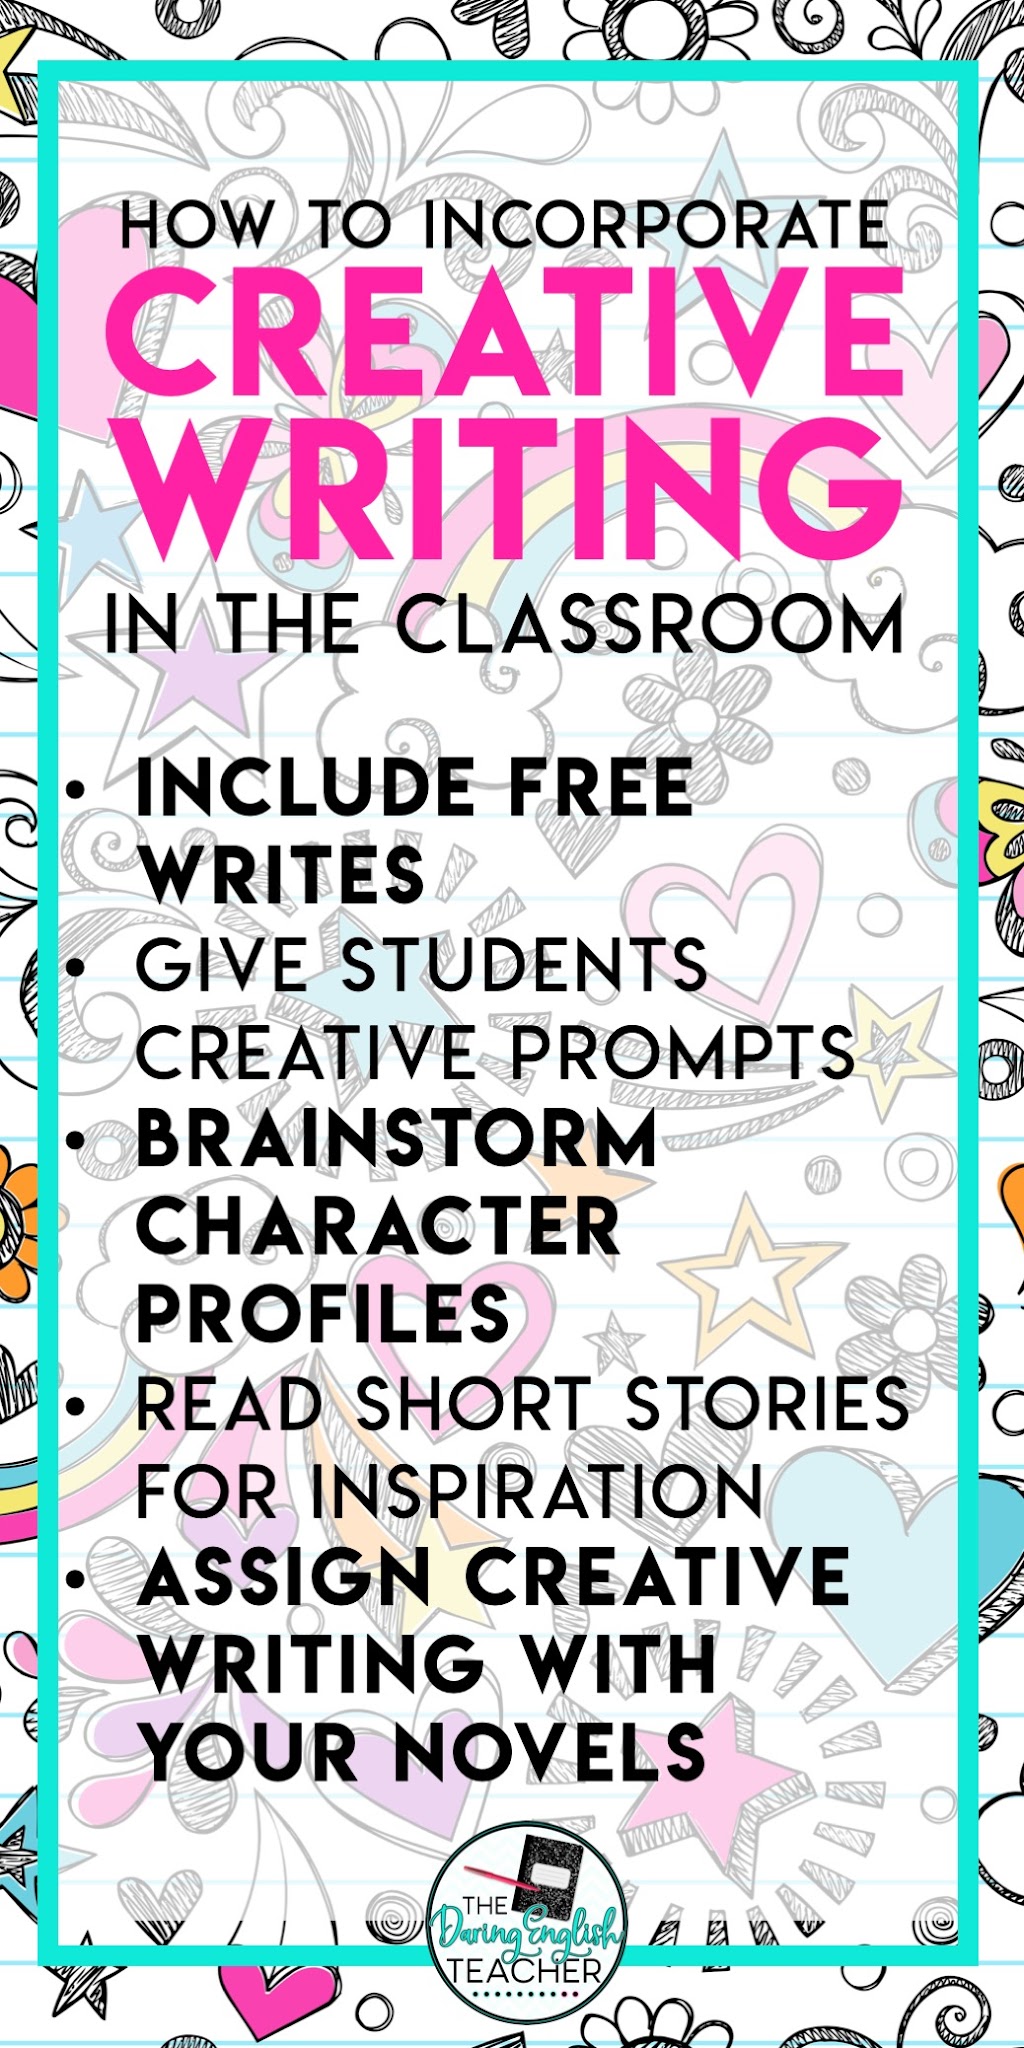 How to Incorporate Creative Writing in the Classroom